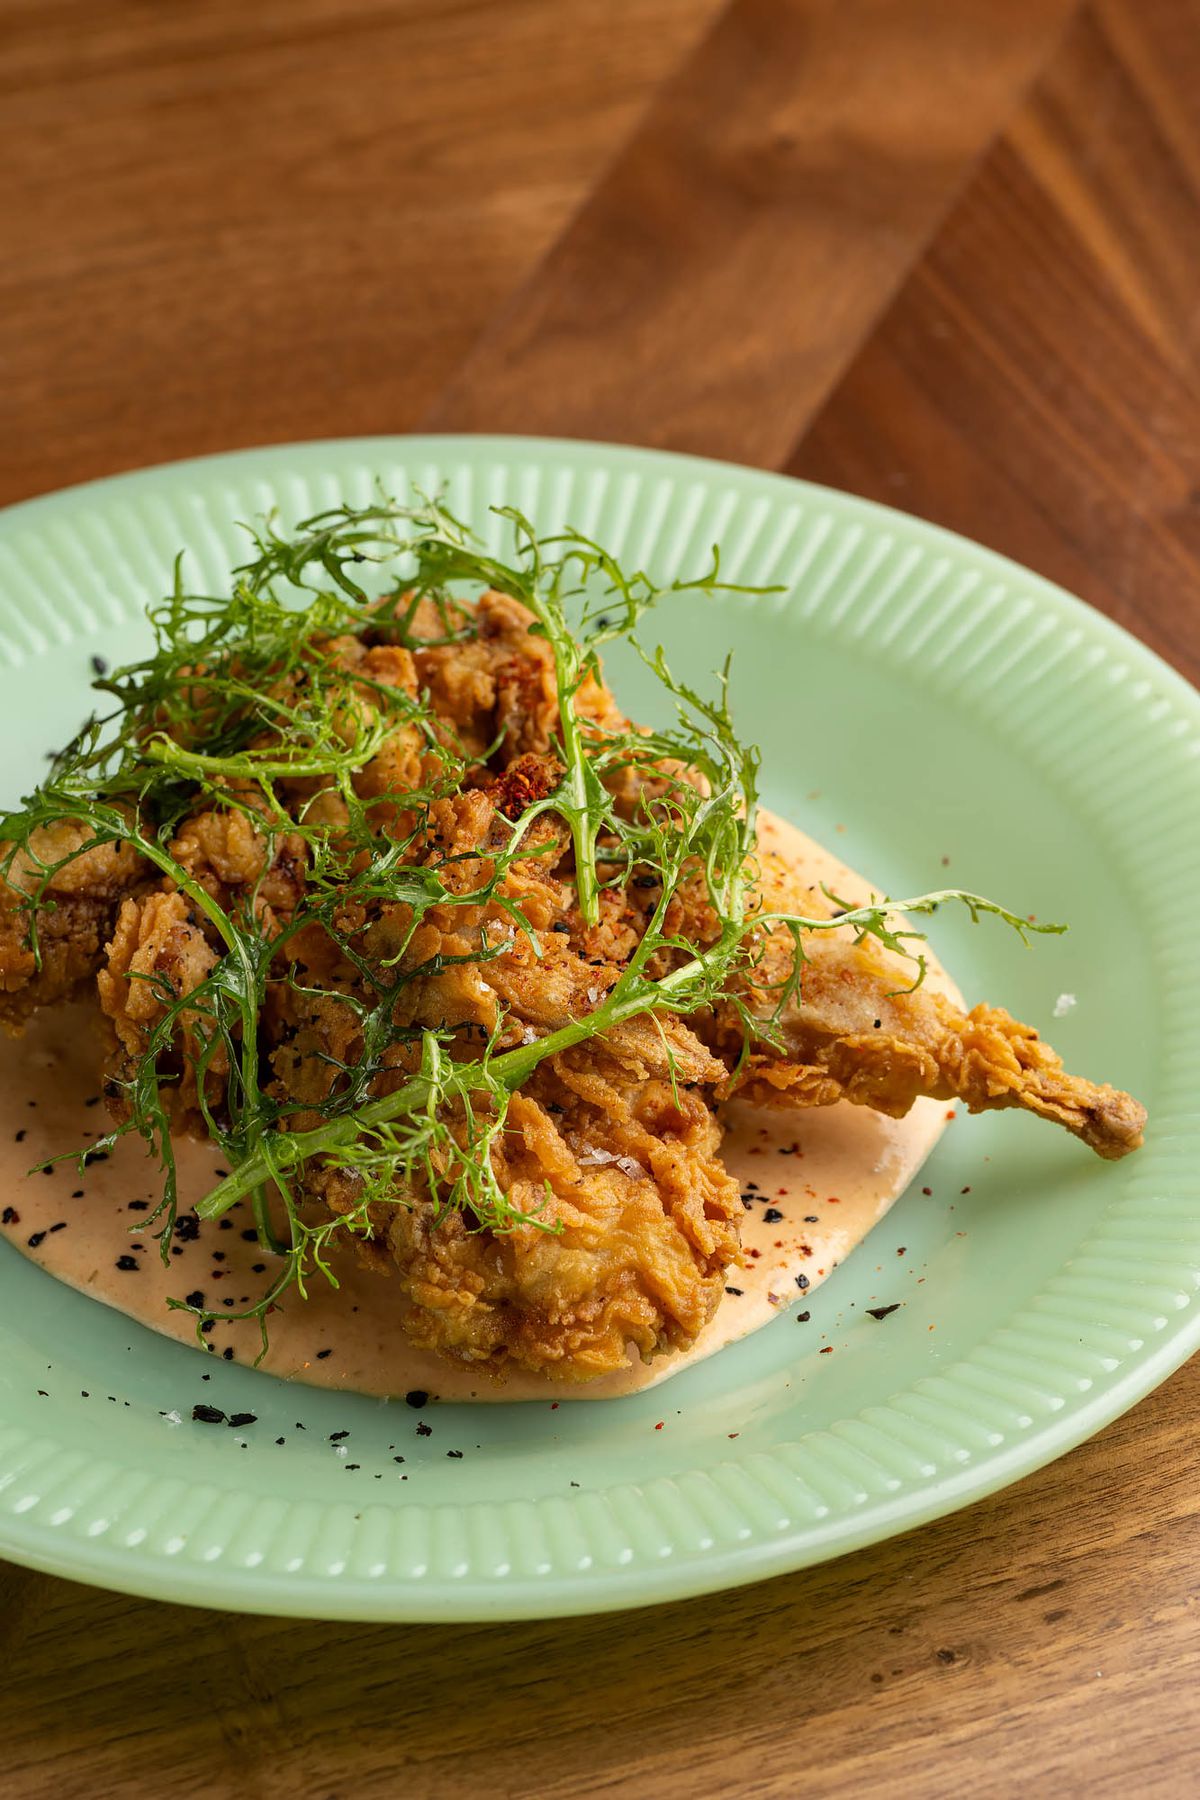 Jerk fried quail, tomato aioli, mustard frill, and aleppo at PleasureMed’s restaurants in West Hollywood.